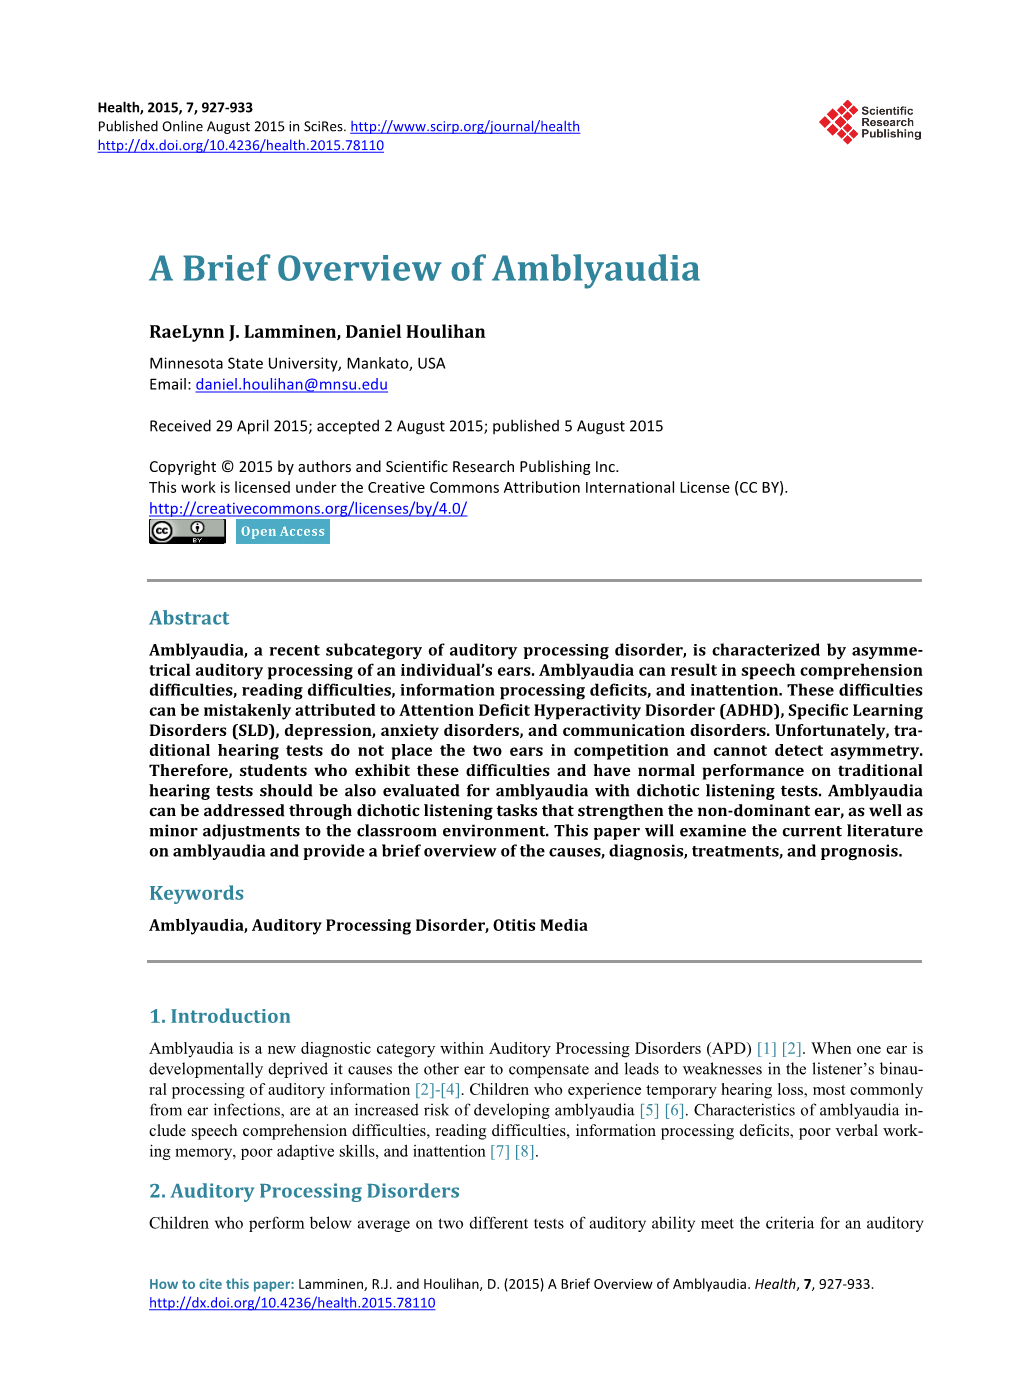 A Brief Overview of Amblyaudia